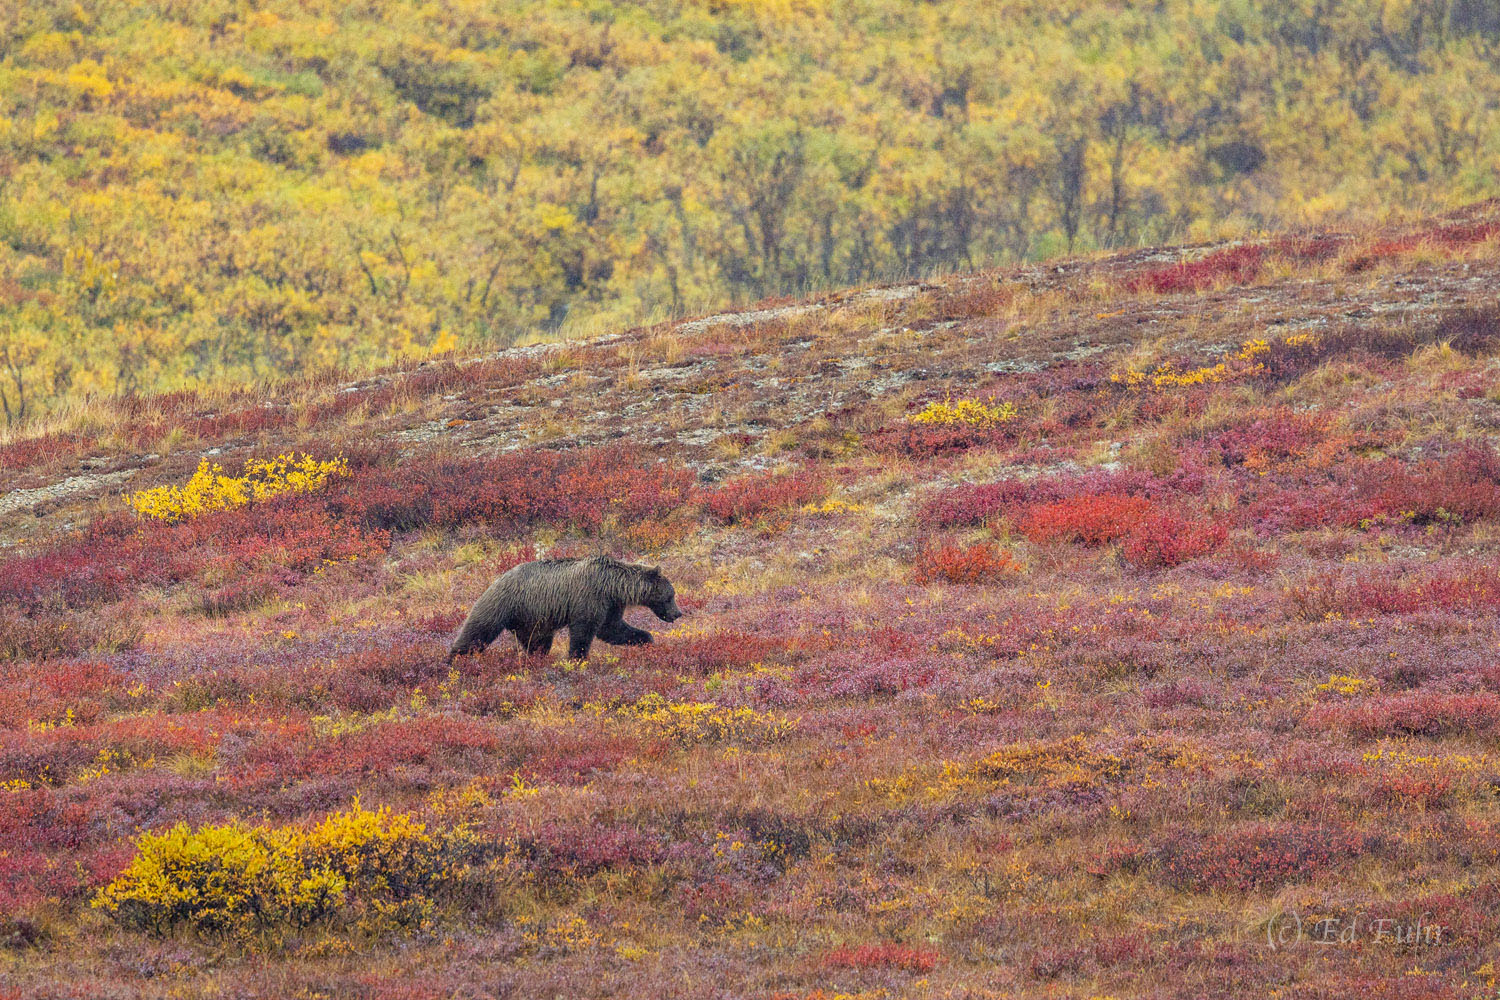 A large grizzly bear makes his way across the autumn tundra.